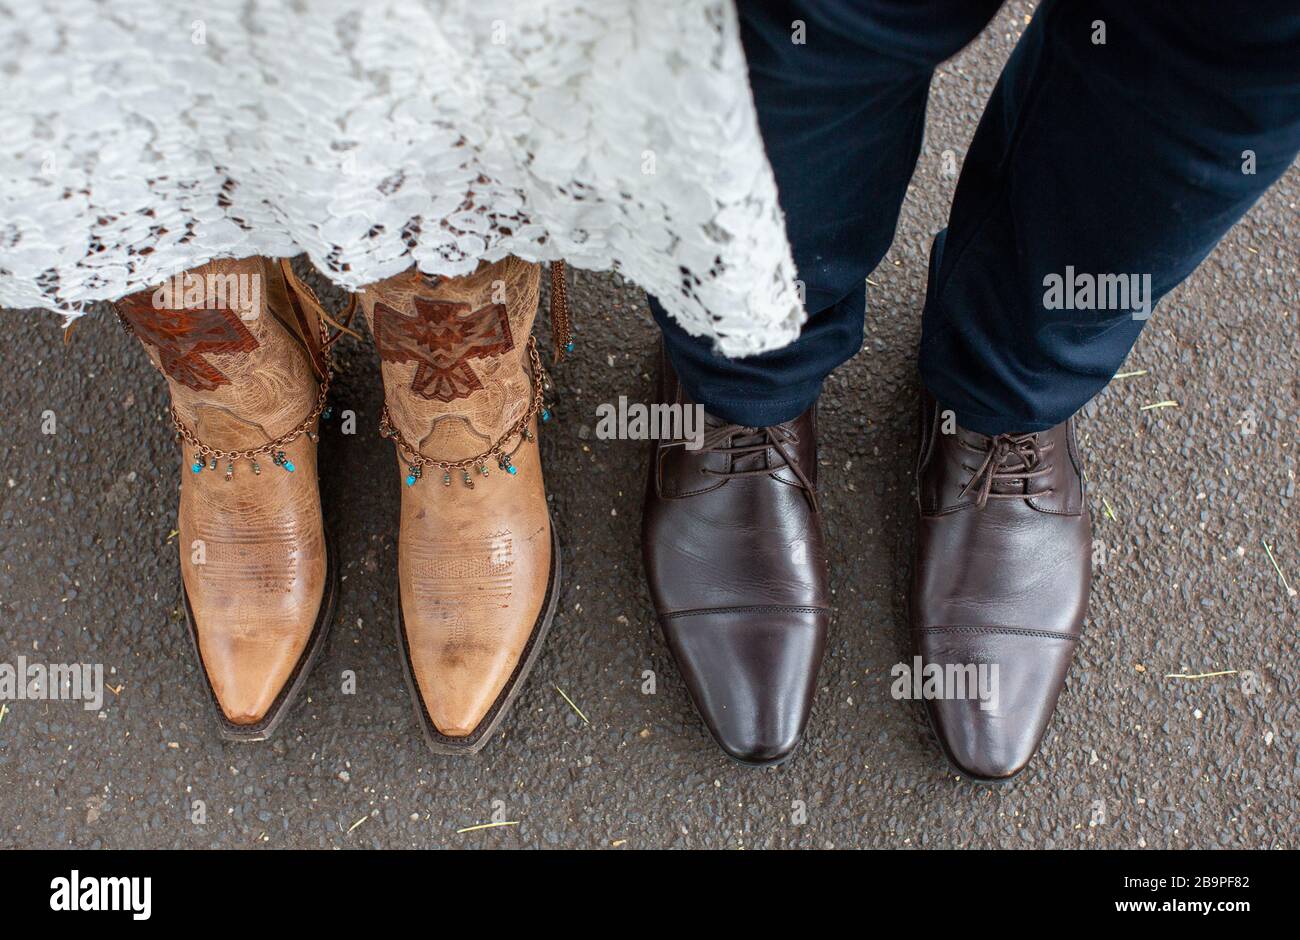 Alternative bride and groom on wedding day wearing cowboy boots Stock Photo